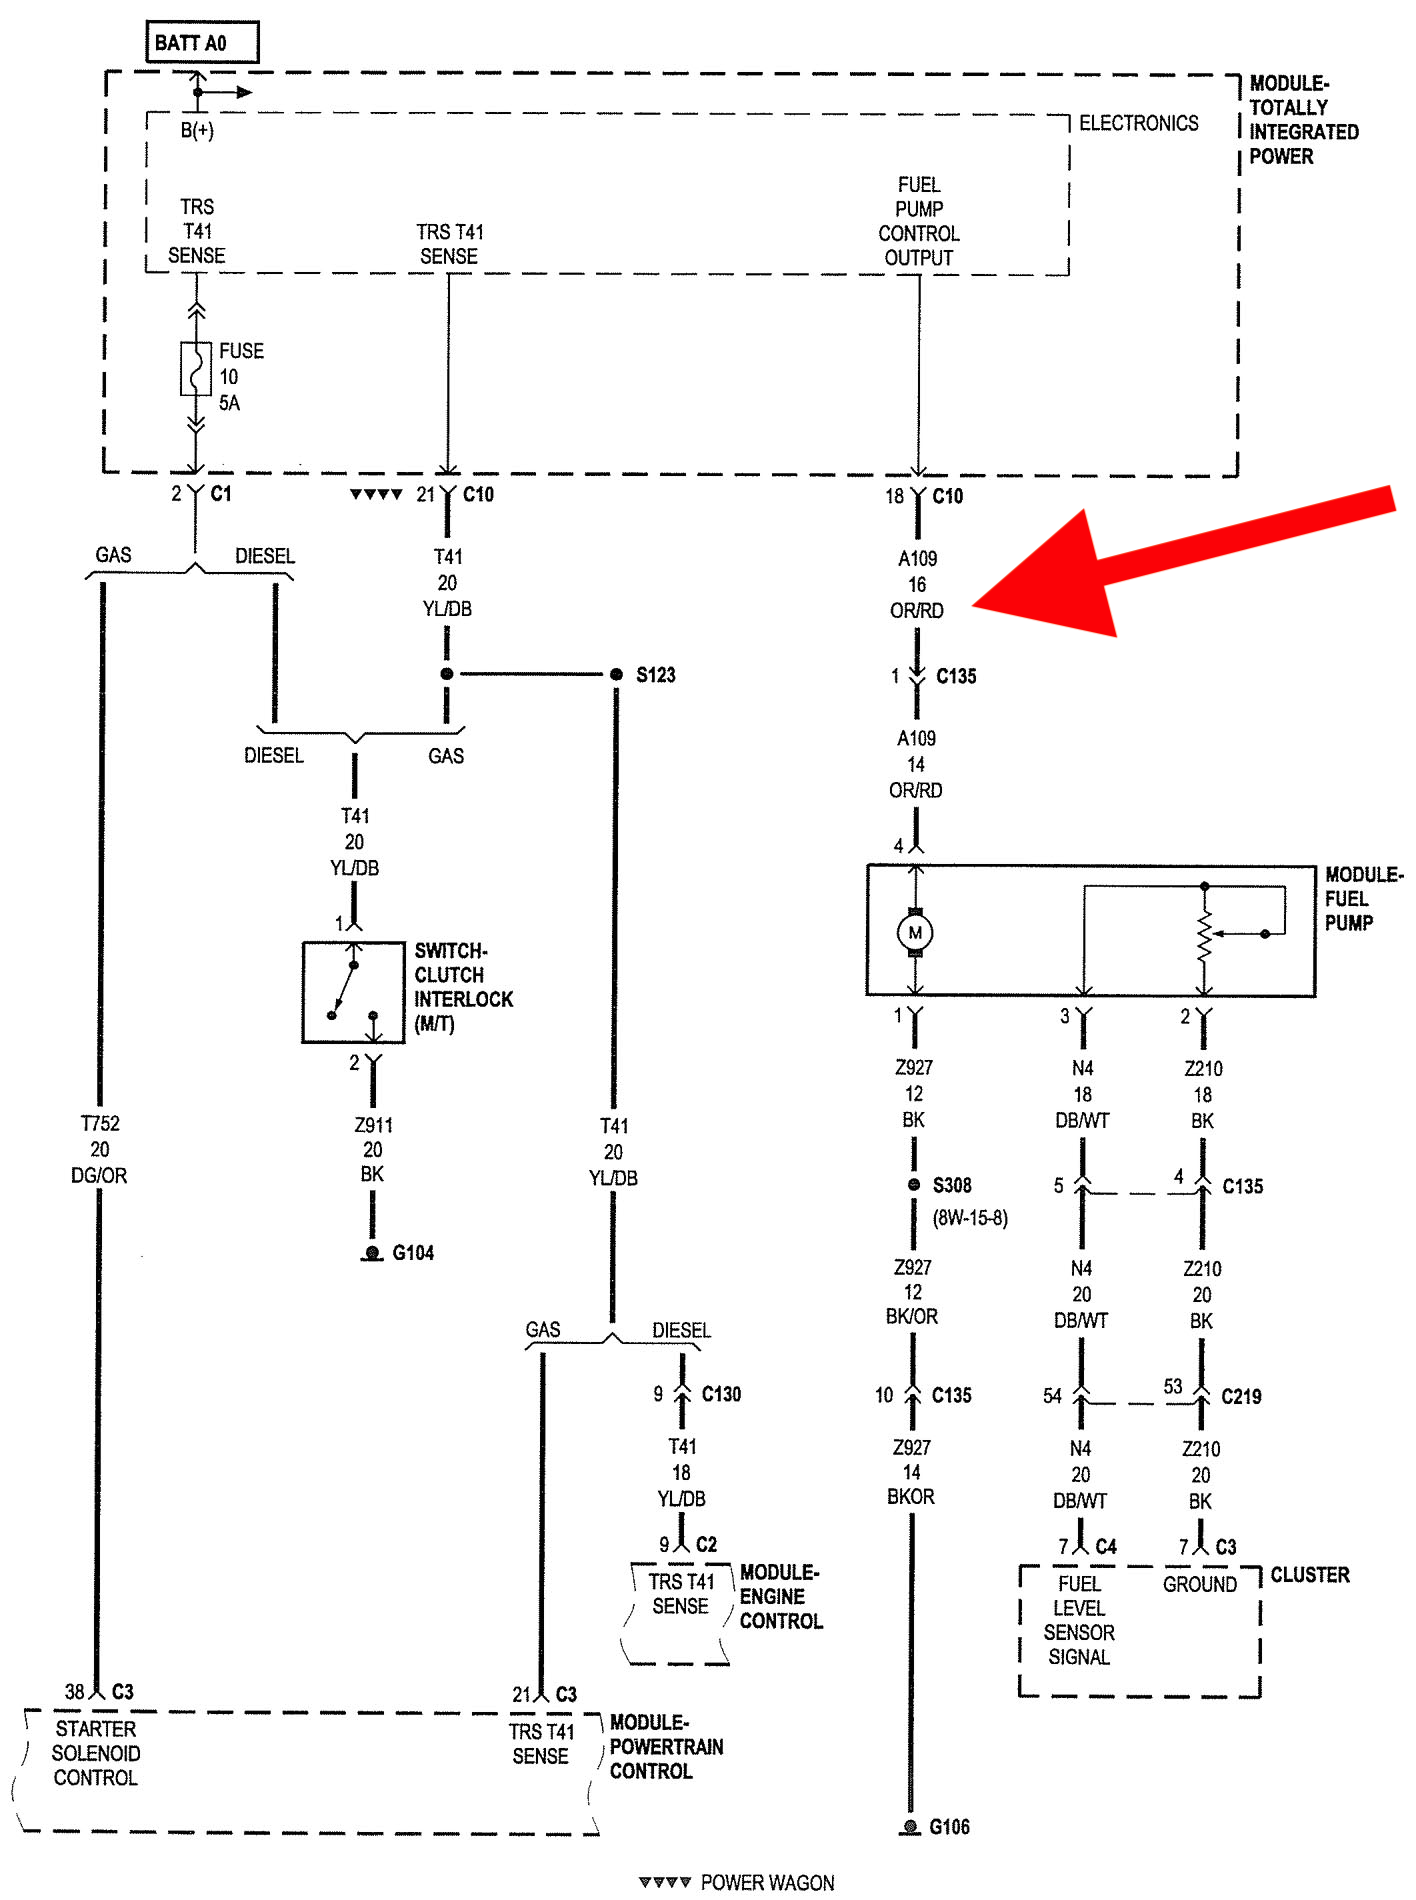 I Was Told I Can Bypass The Fuel Pump Relay On 2008 Dodge Ram 1500 5 7  - 2011 Dodge RAM 1500 Fuel Pump Relay Wiring Diagram